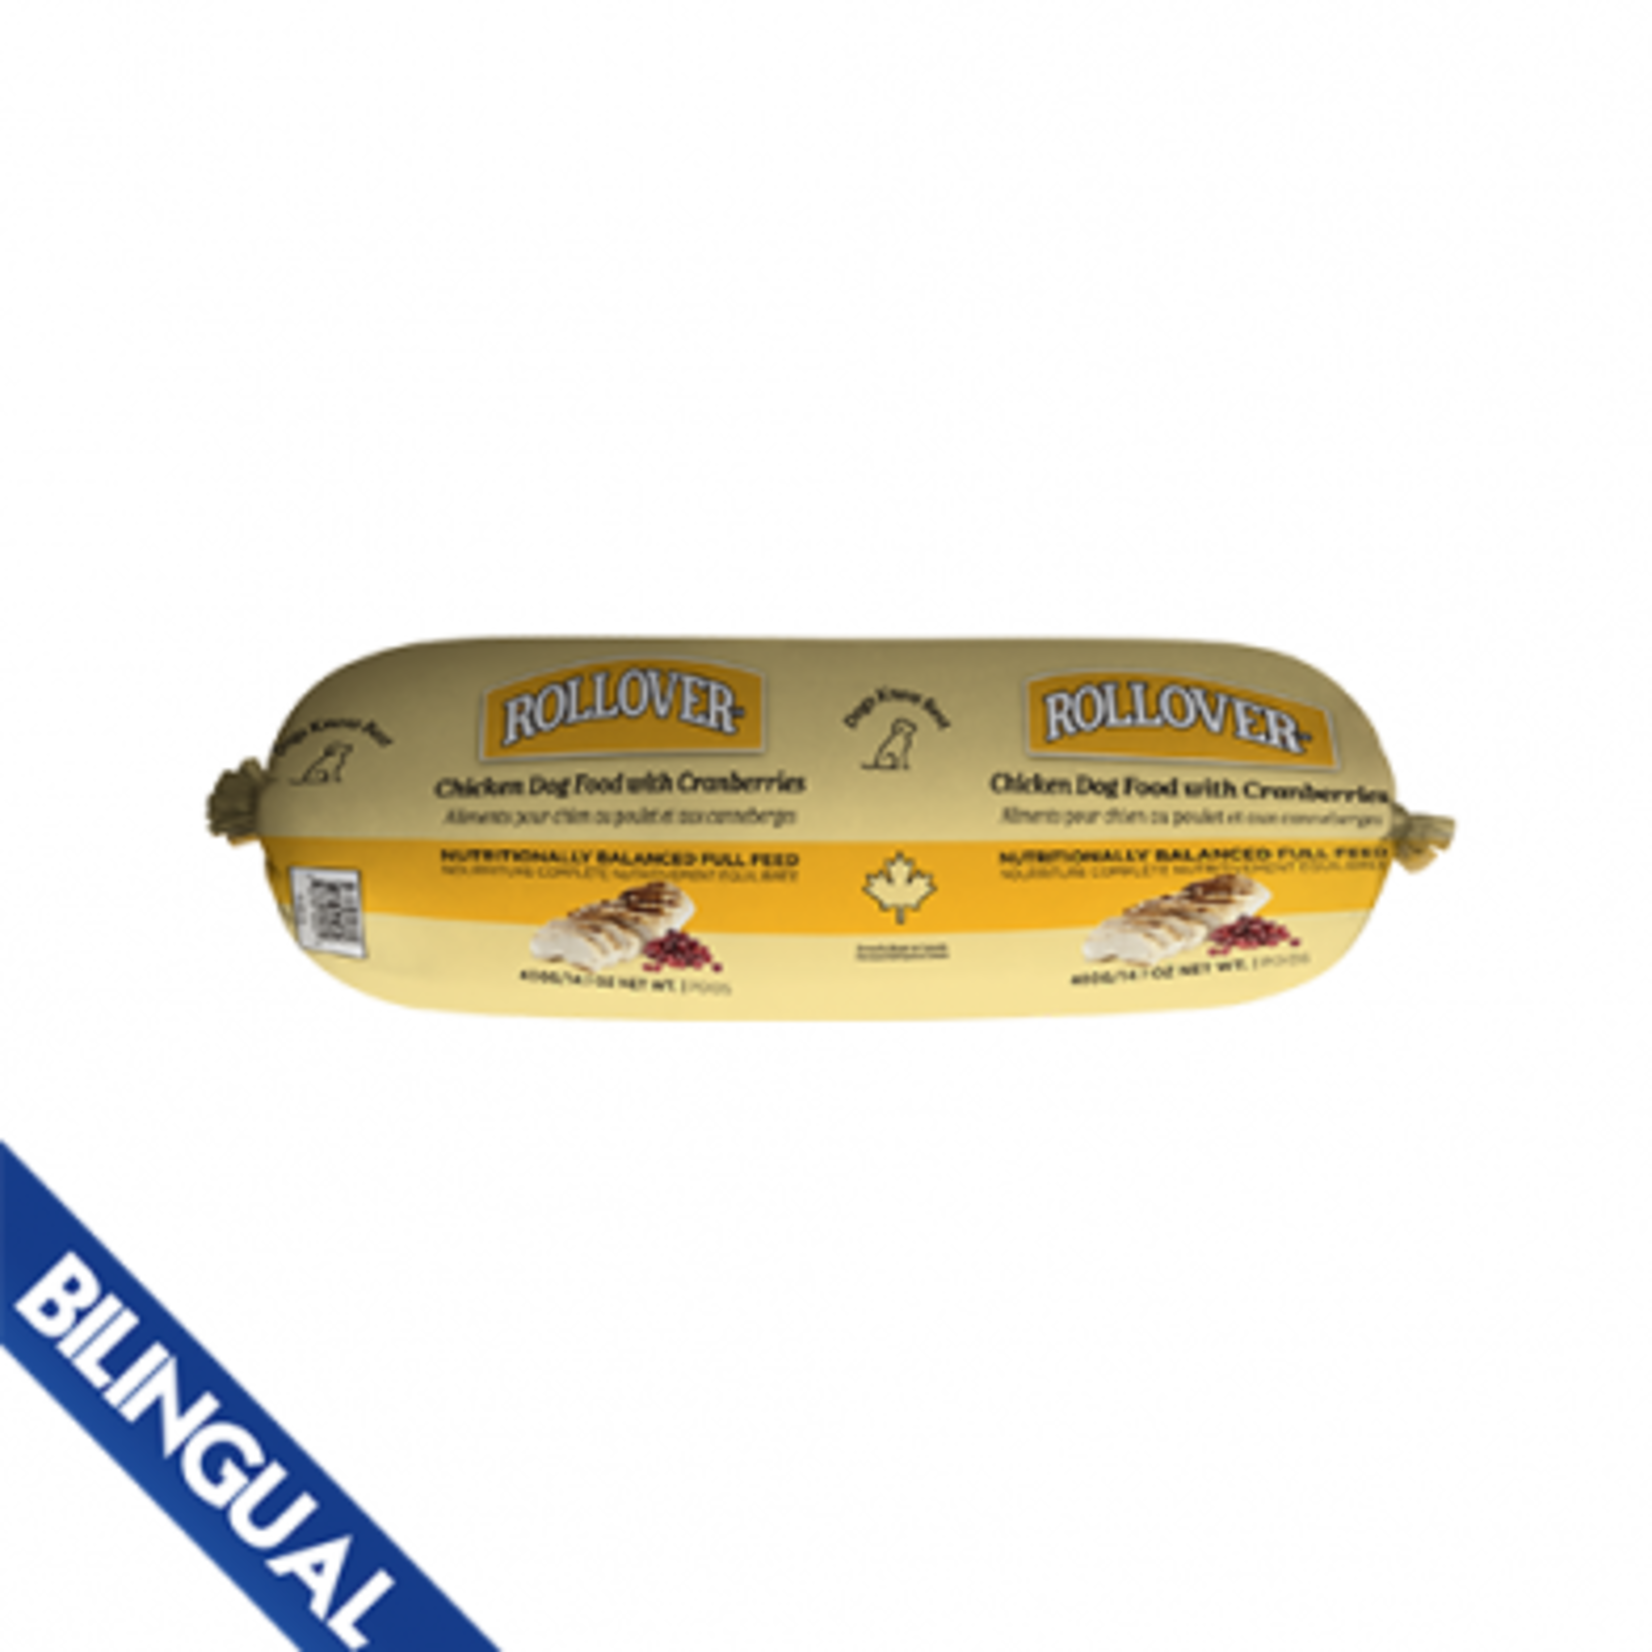 ROLLOVER POULET & CANNEBERGES 400G